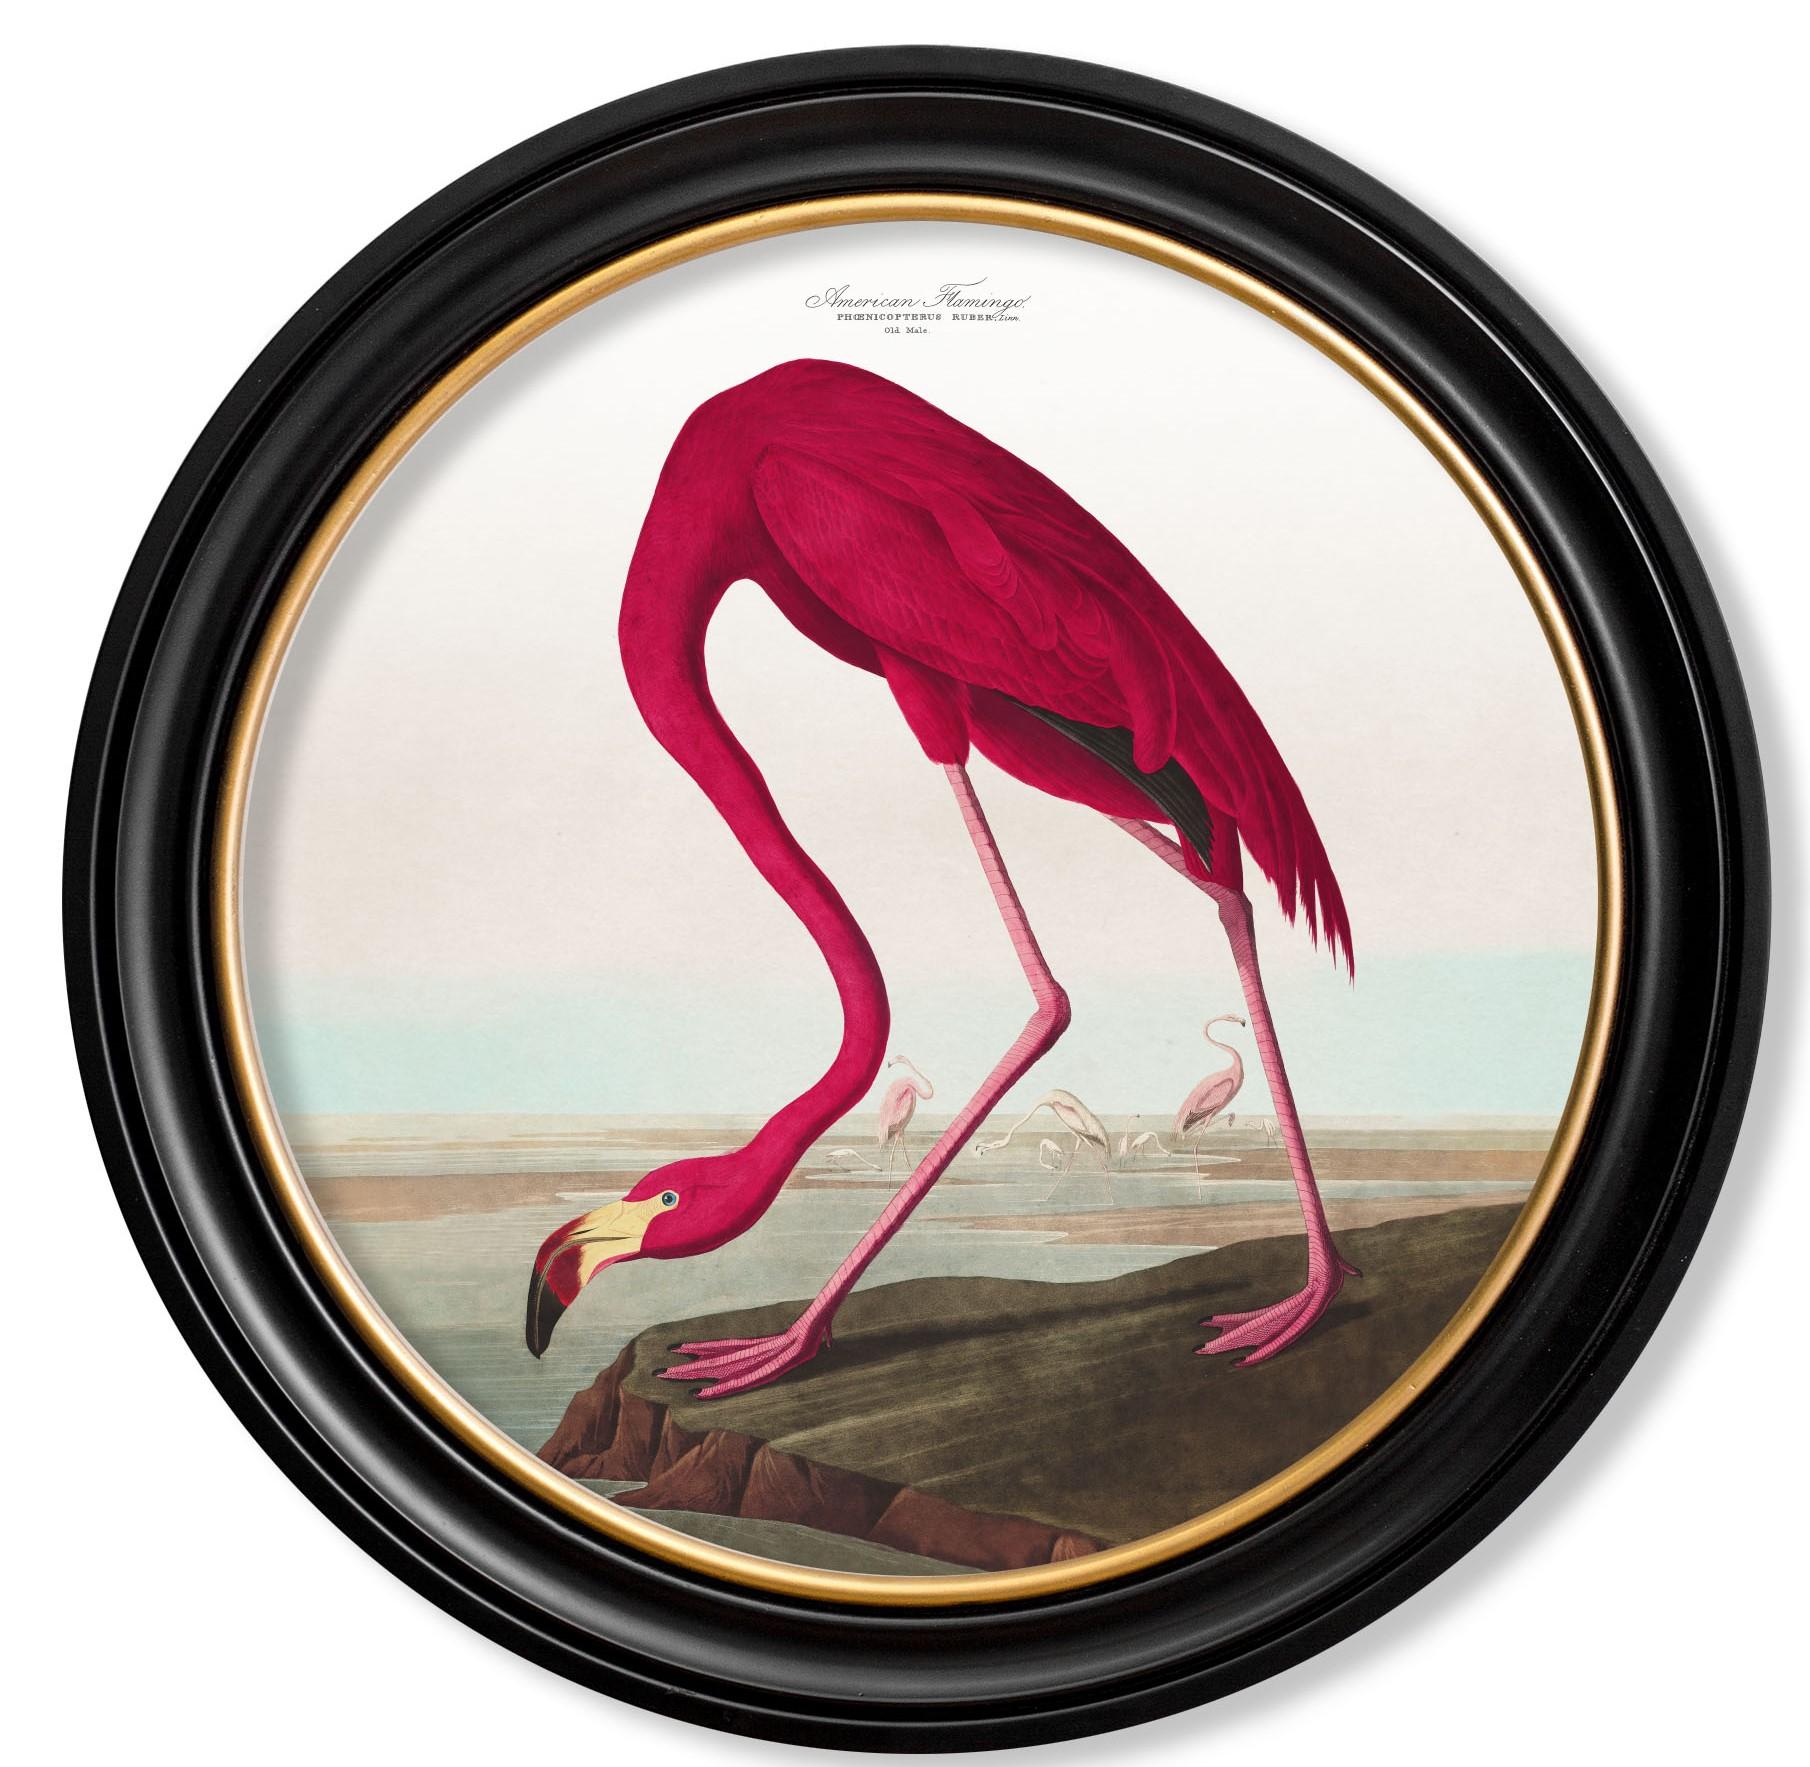 This is a digitally remastered print of a Flamingo referenced from an Audubon.
Birds of America hand coloured print, originally from the 1800's.

Prints of this style were originally printed in black and white and then hand painted over the top